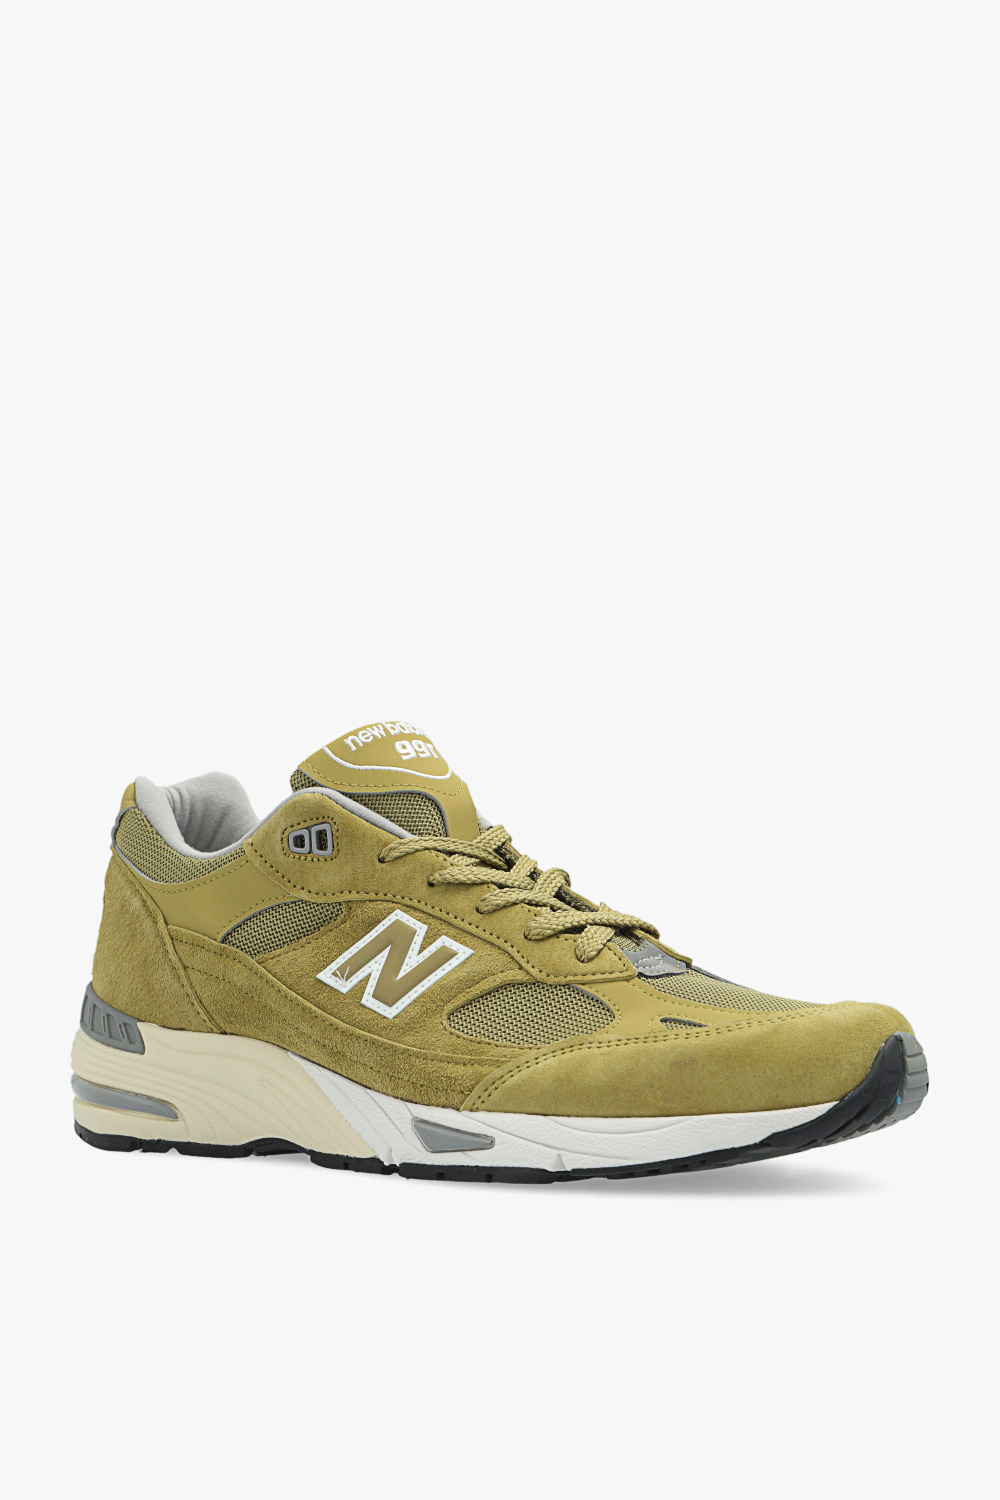 M991GGW' sneakers from 'Made in UK' series New Balance - IetpShops